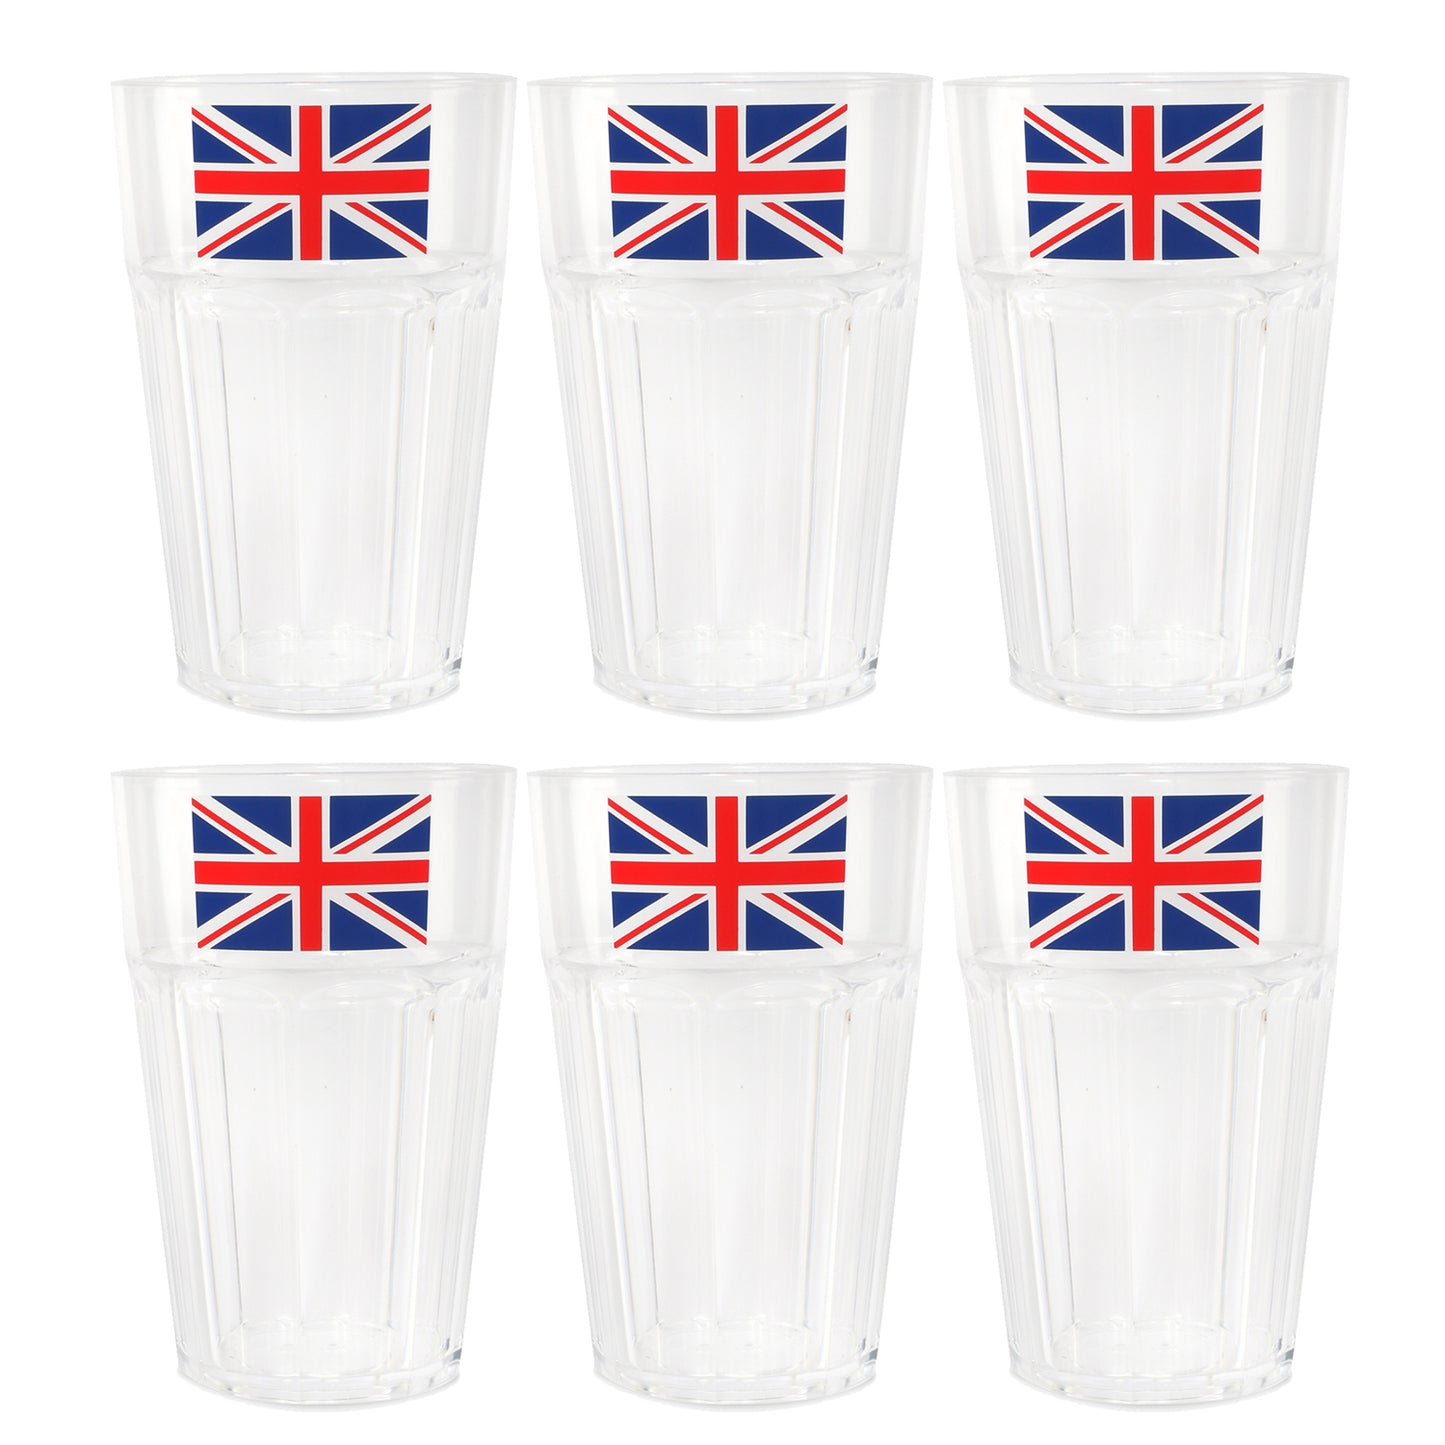 325ml HEAVY DUTY PLASTIC DISPOSABLE UNION JACK TUMBLER CUP IN PACKS 6